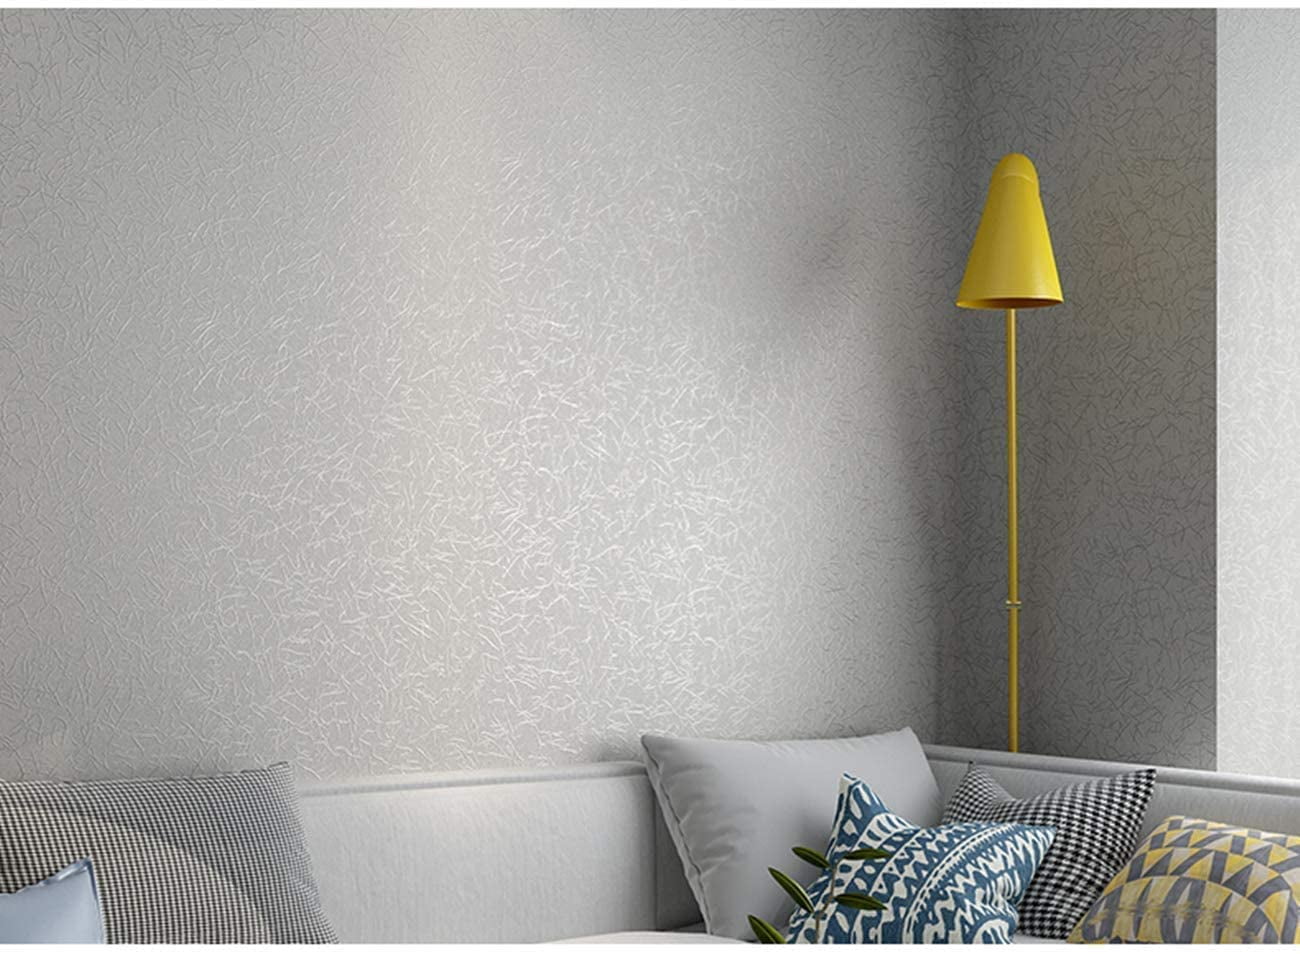 Tempaper Self Adhesive Wallpaper  Bathroom Reveal  The House of Silver  Lining